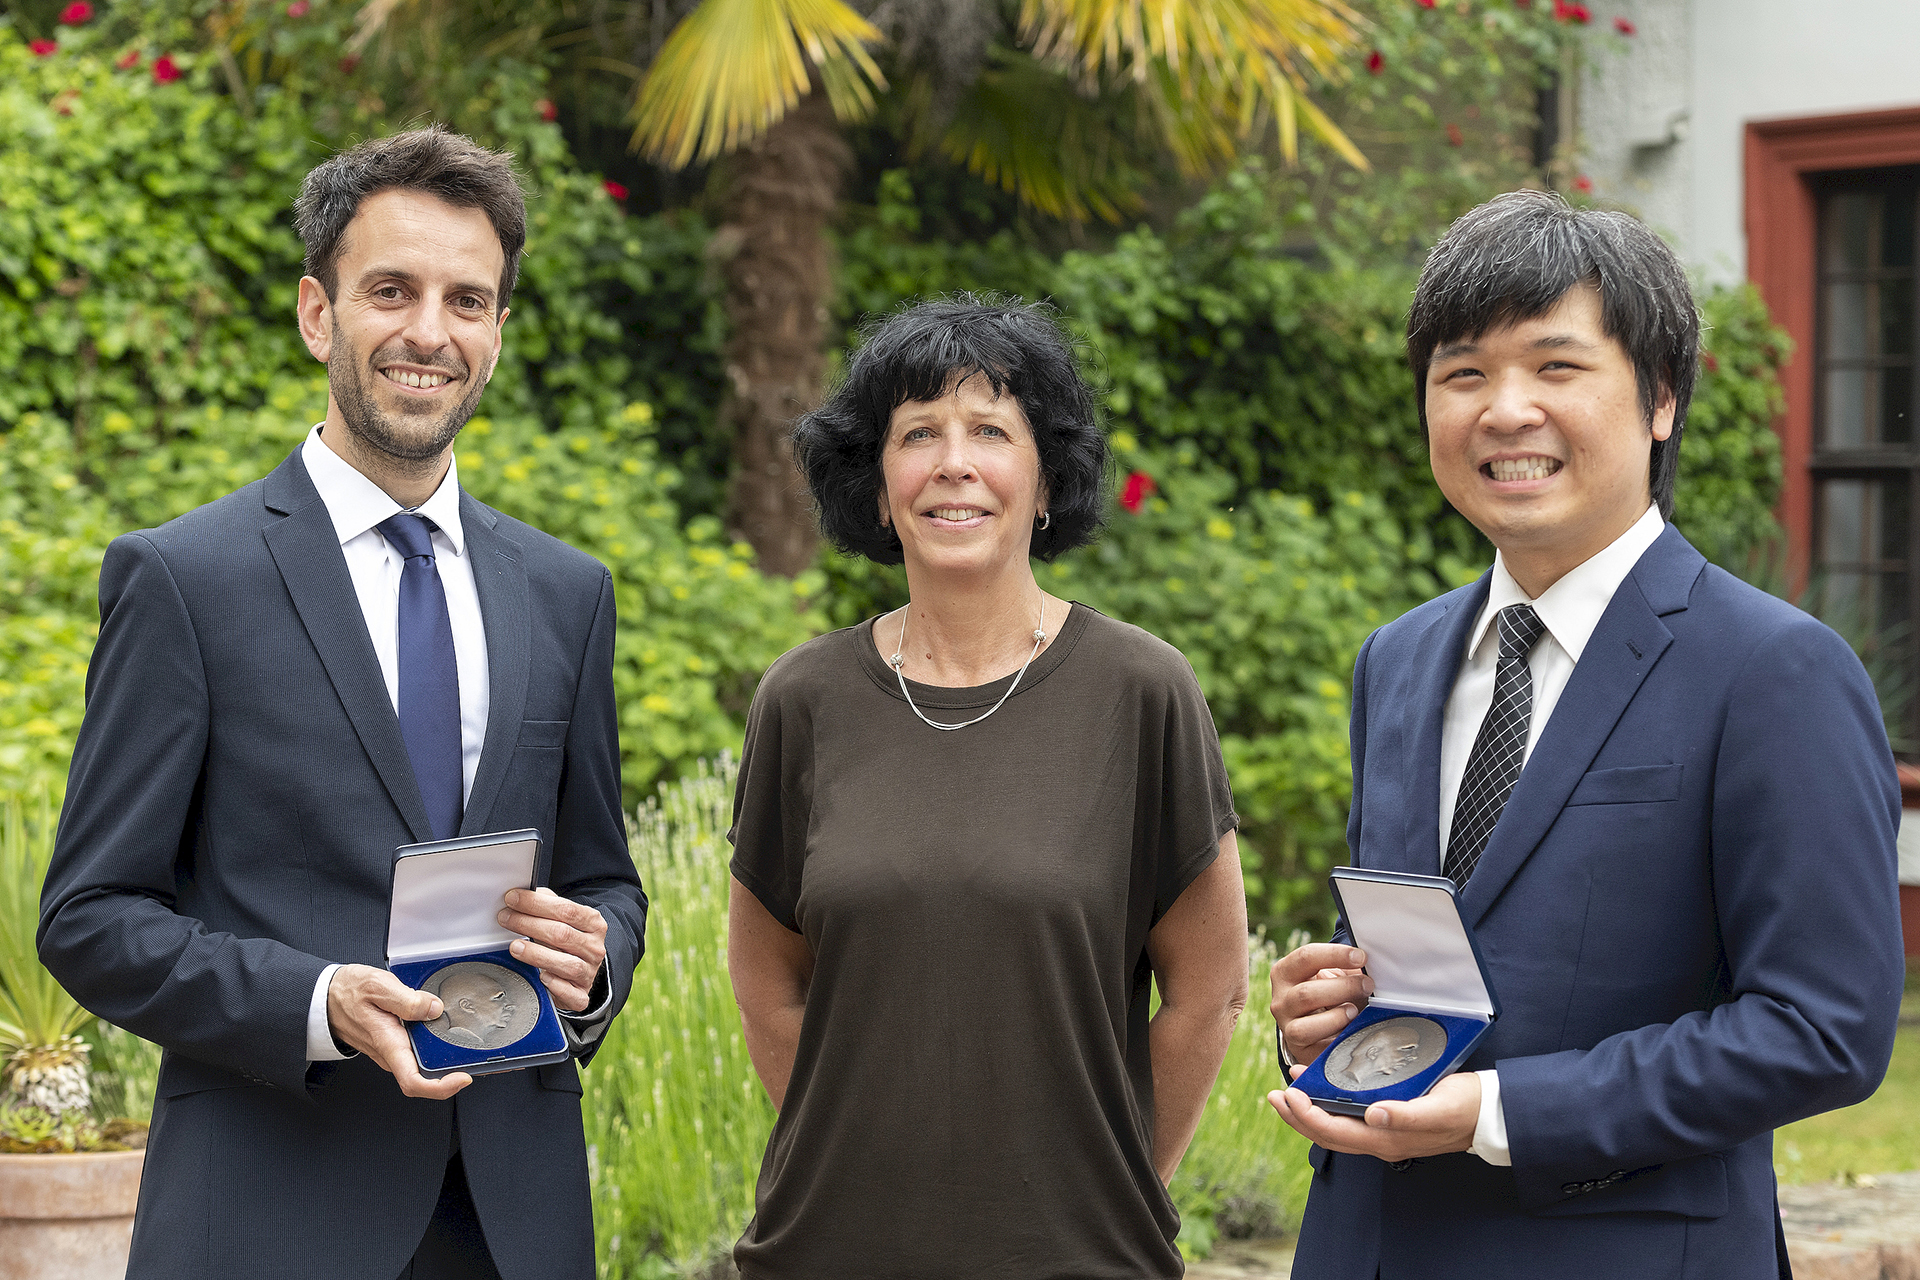 both award winners together with a colleague from Freudenberg